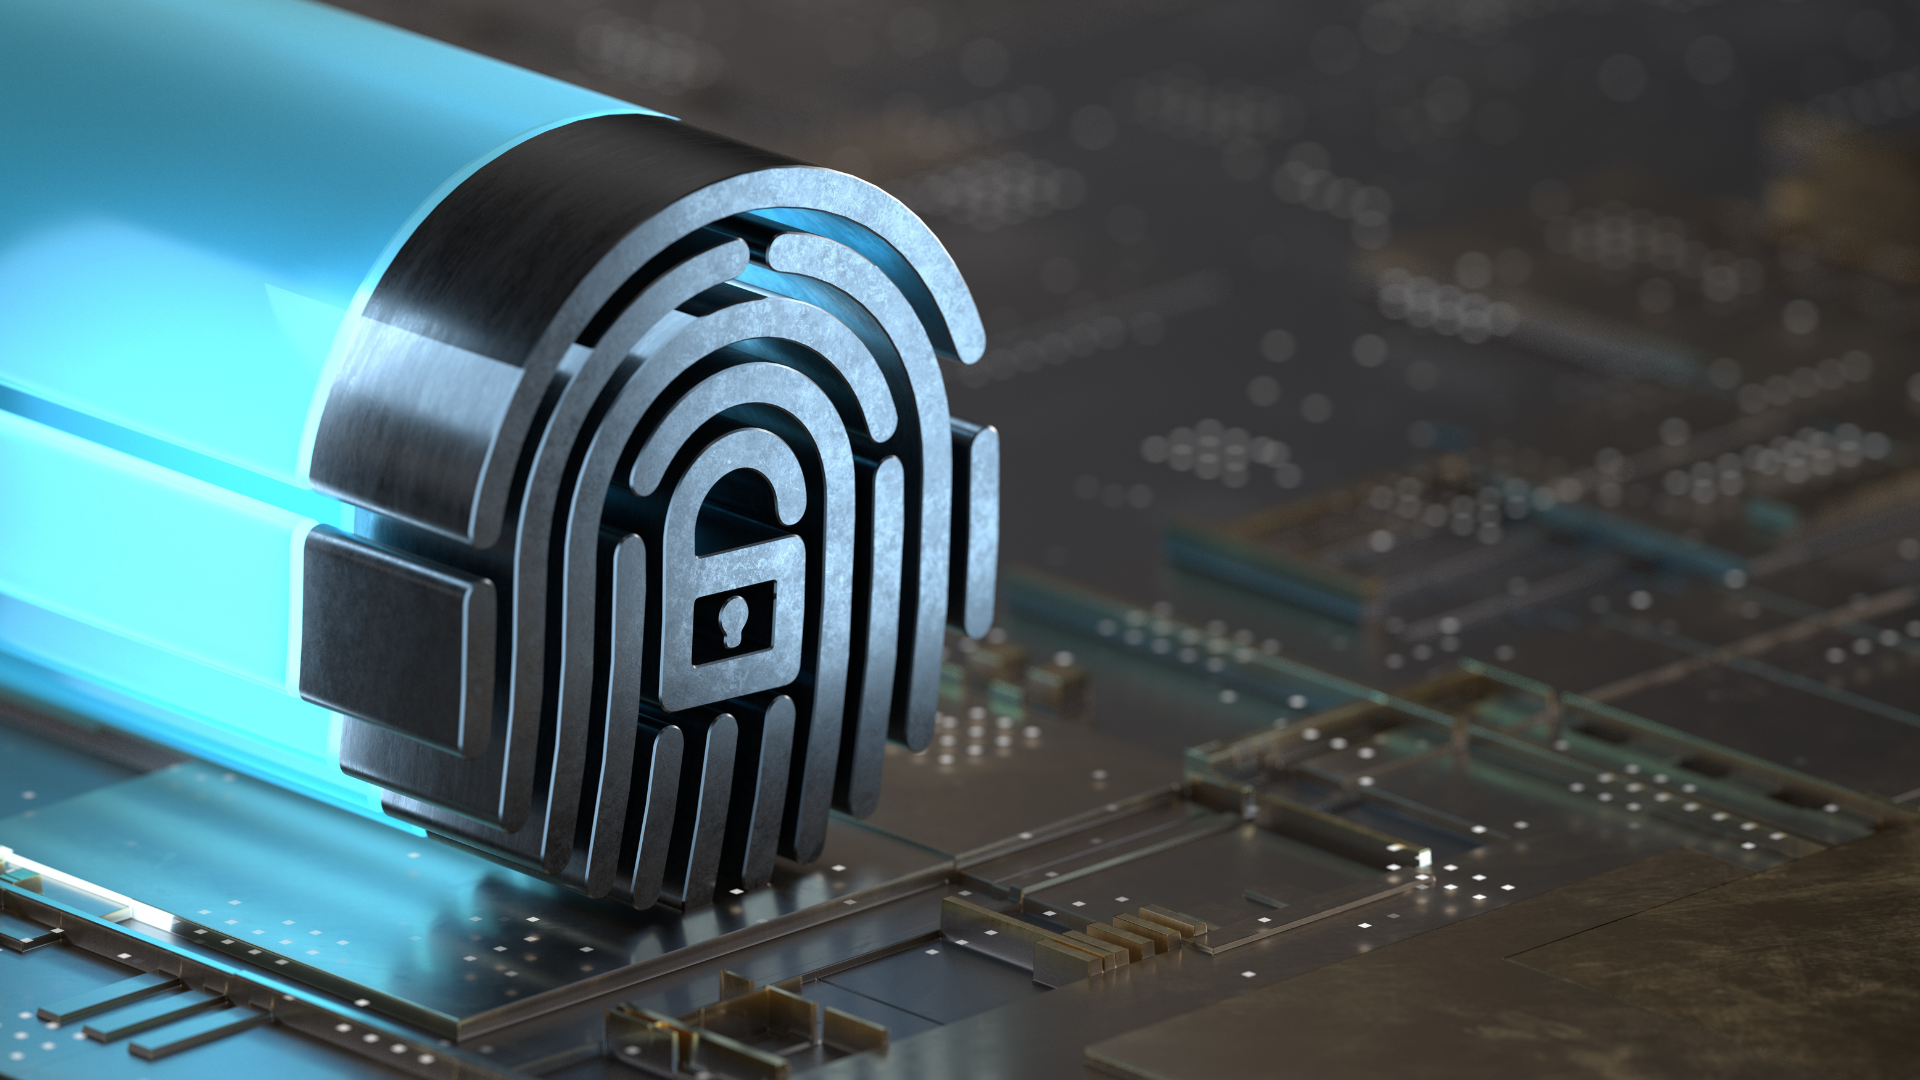 A fingerprint staying securely on a circuit board symbolizing MFA benefits and cybersecurity